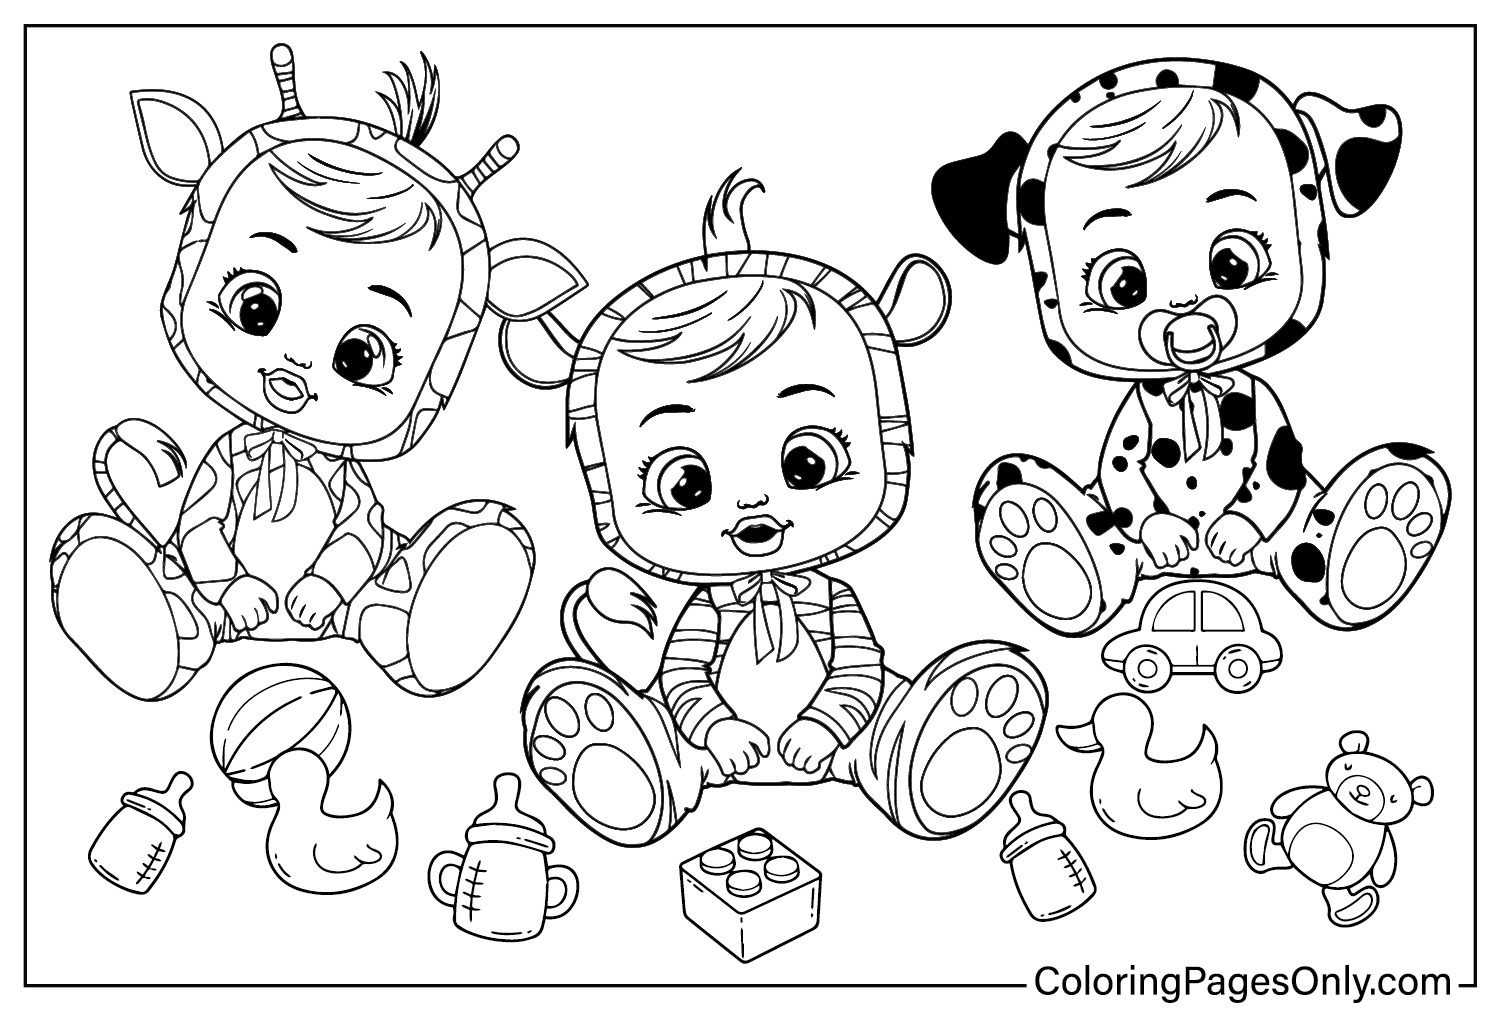 Cry Babies Picture to Color from Cry Babies